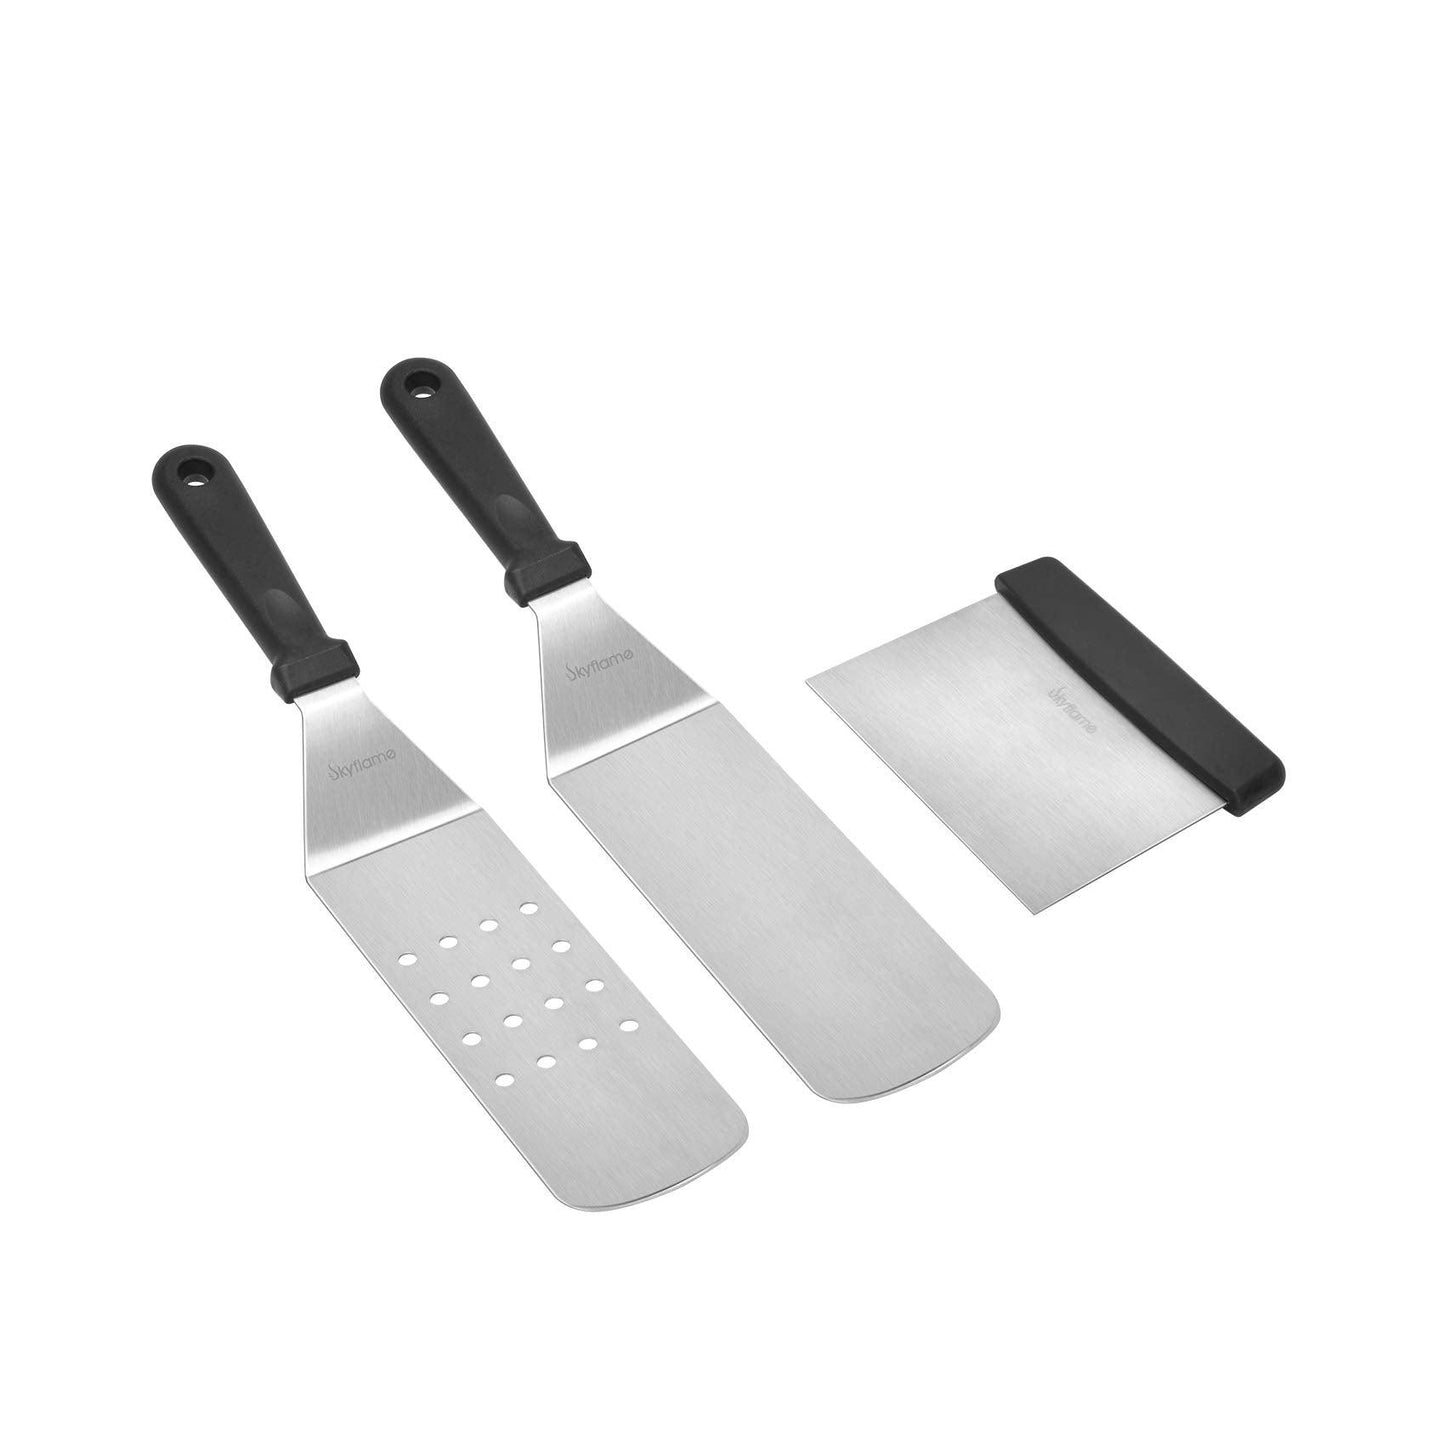 Skyflame 3 Piece Griddle Accessories Kit, Stainless Steel Professional Long BBQ Grill Spatula/Turner & Scraper Set for Flat Top Grill Hibachi Camping Cooking - CookCave